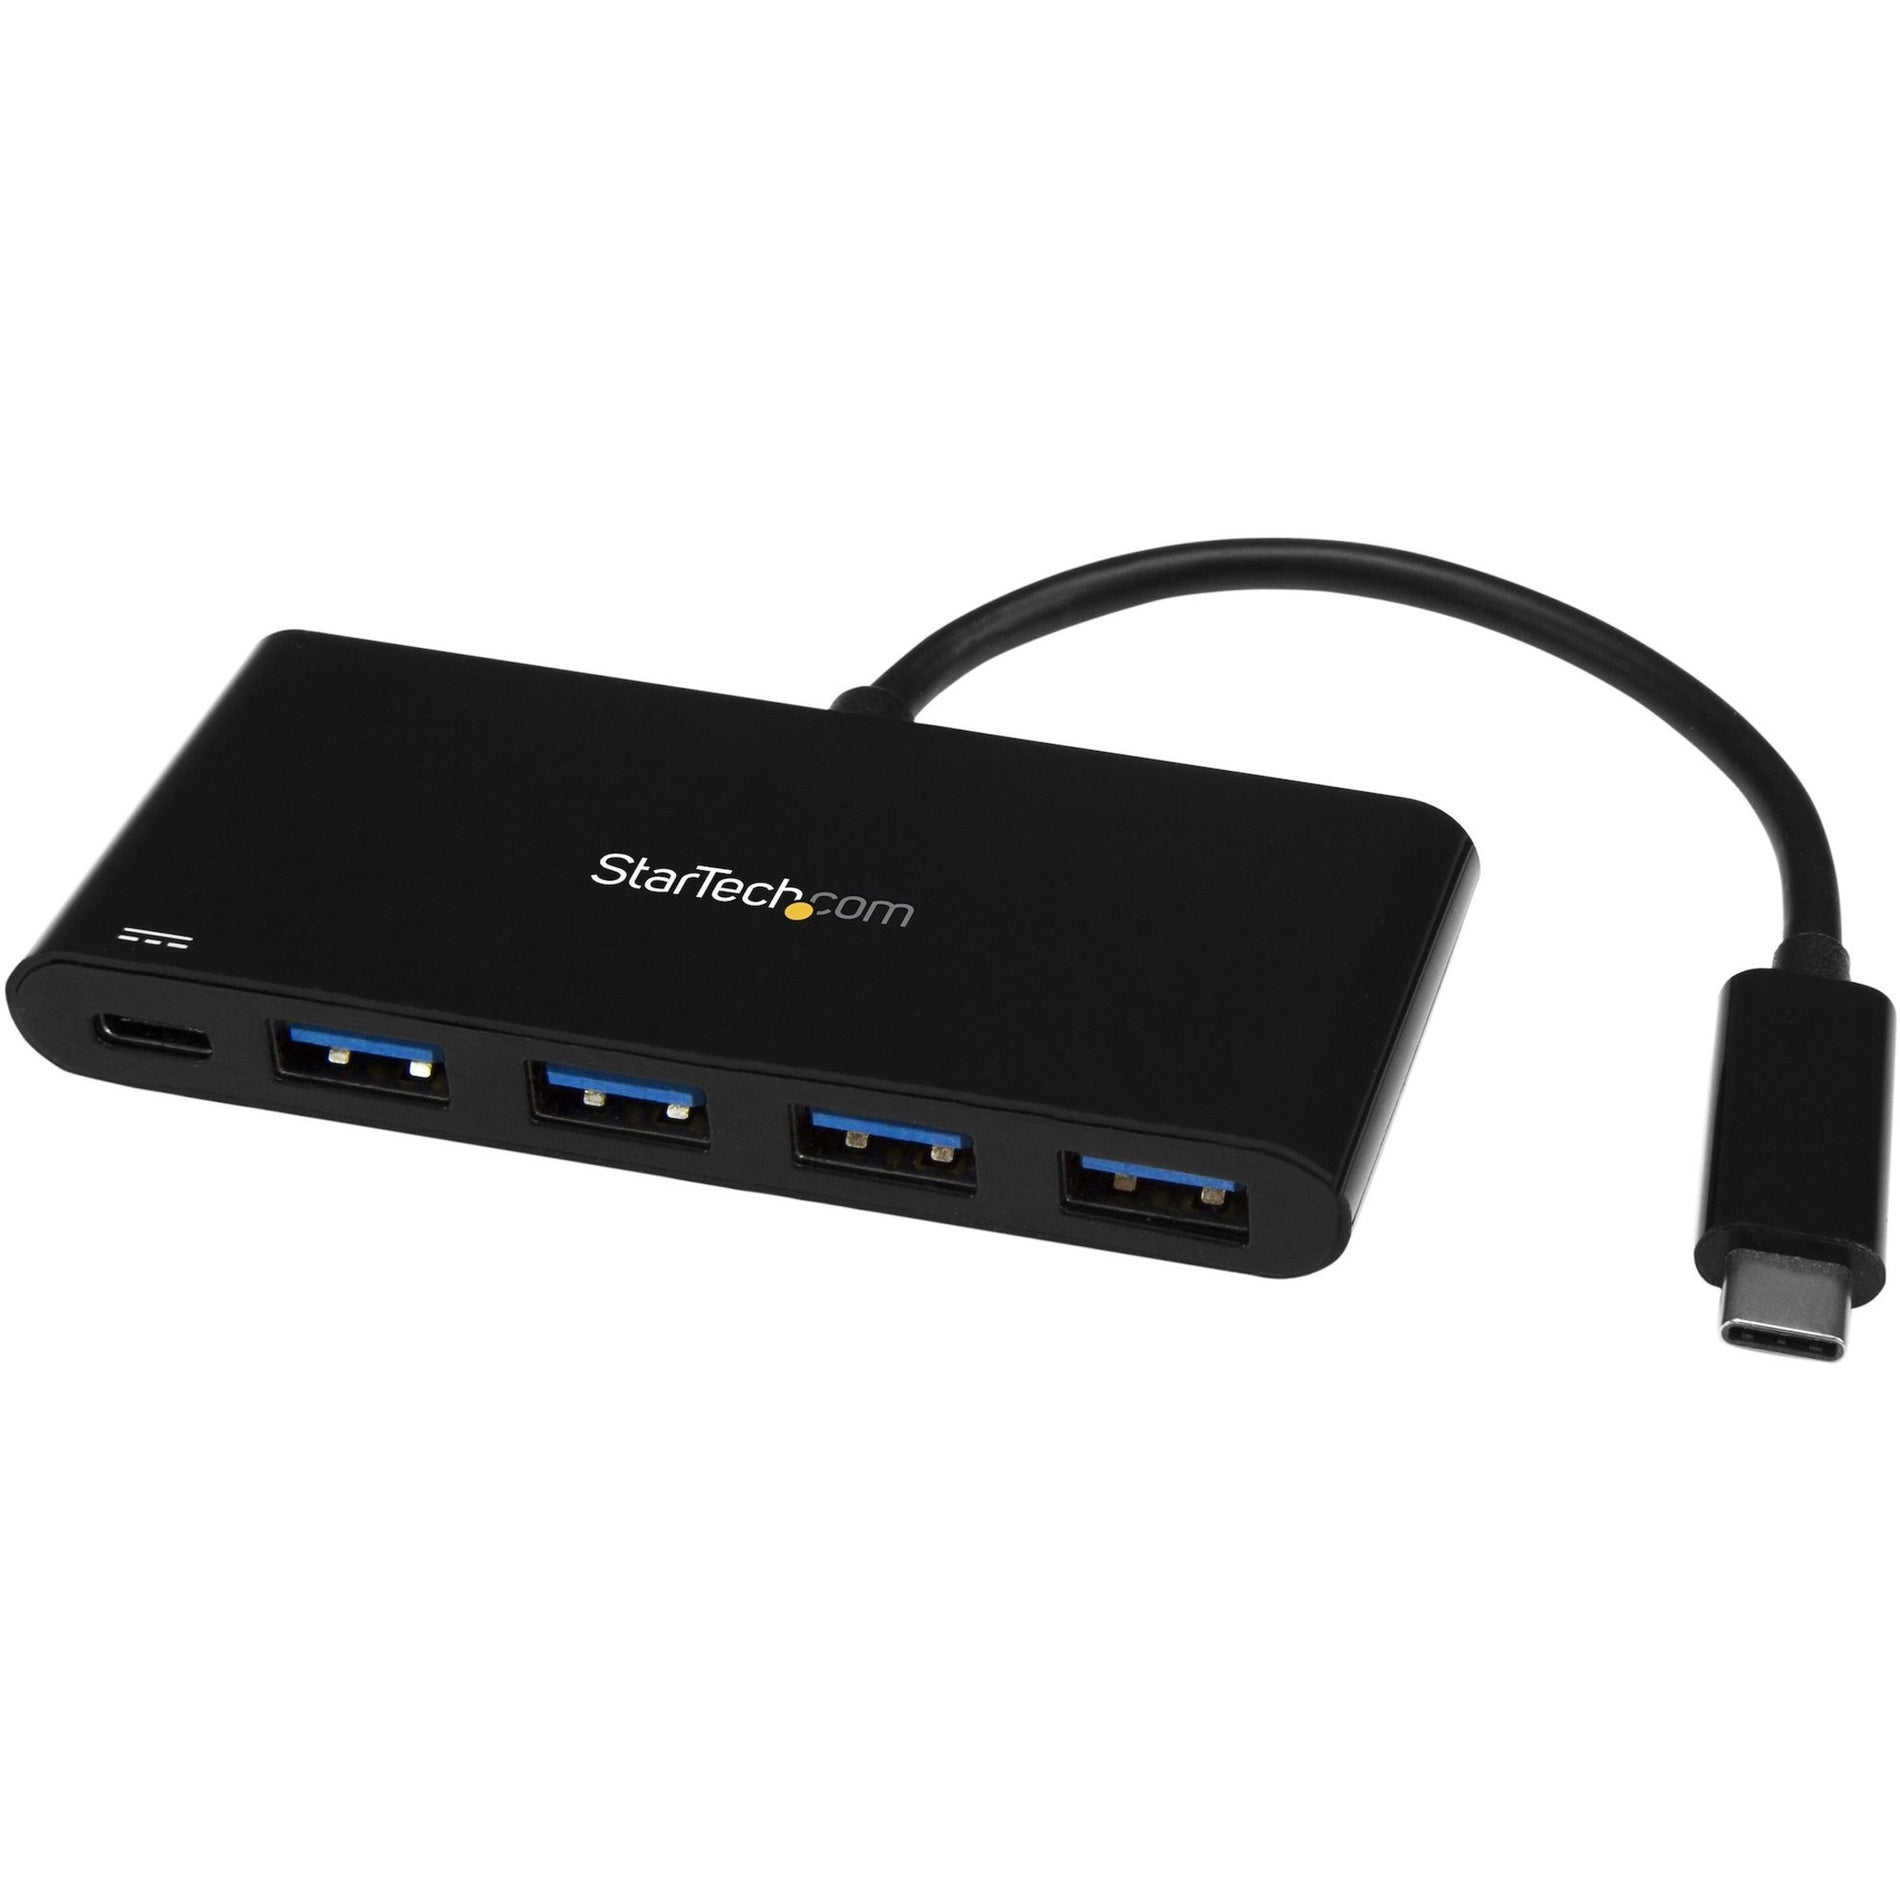 StarTech.com HB30C4AFPD 4-Port USB-C Hub with Power Delivery - USB-C to 4x USB-A - USB 3.0 Hub, Expand Your USB Connectivity